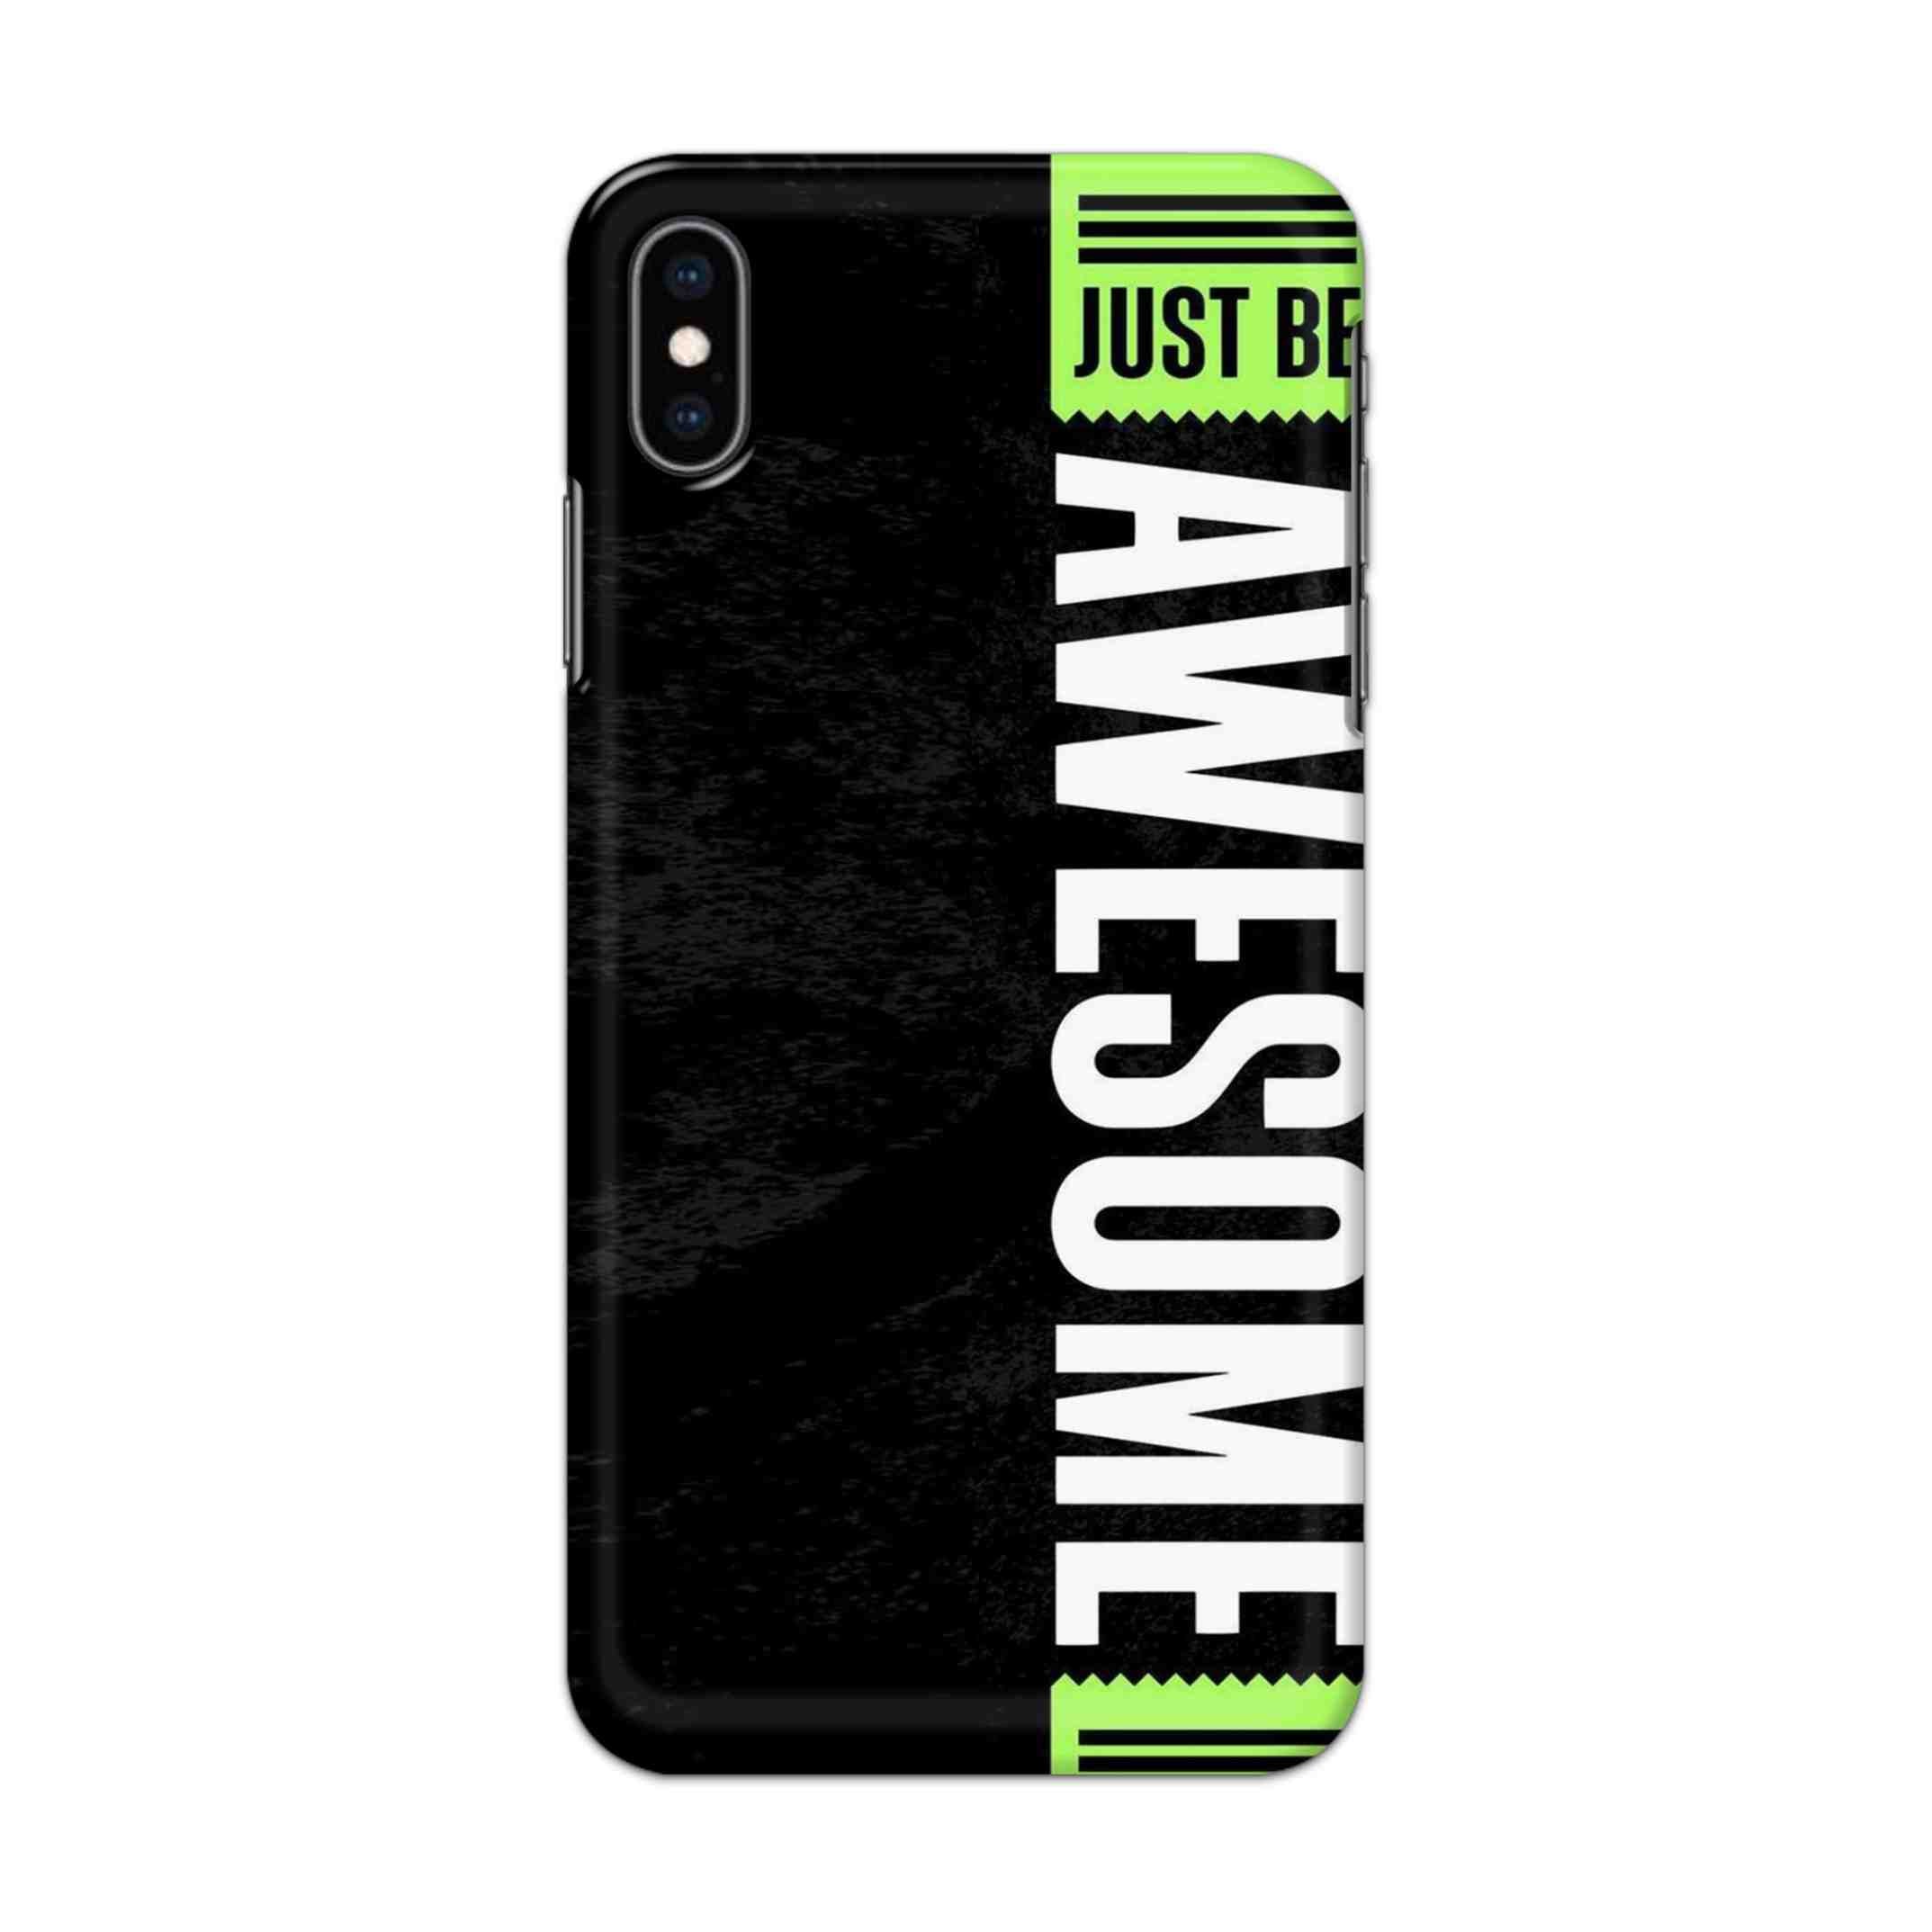 Buy Awesome Street Hard Back Mobile Phone Case/Cover For iPhone XS MAX Online